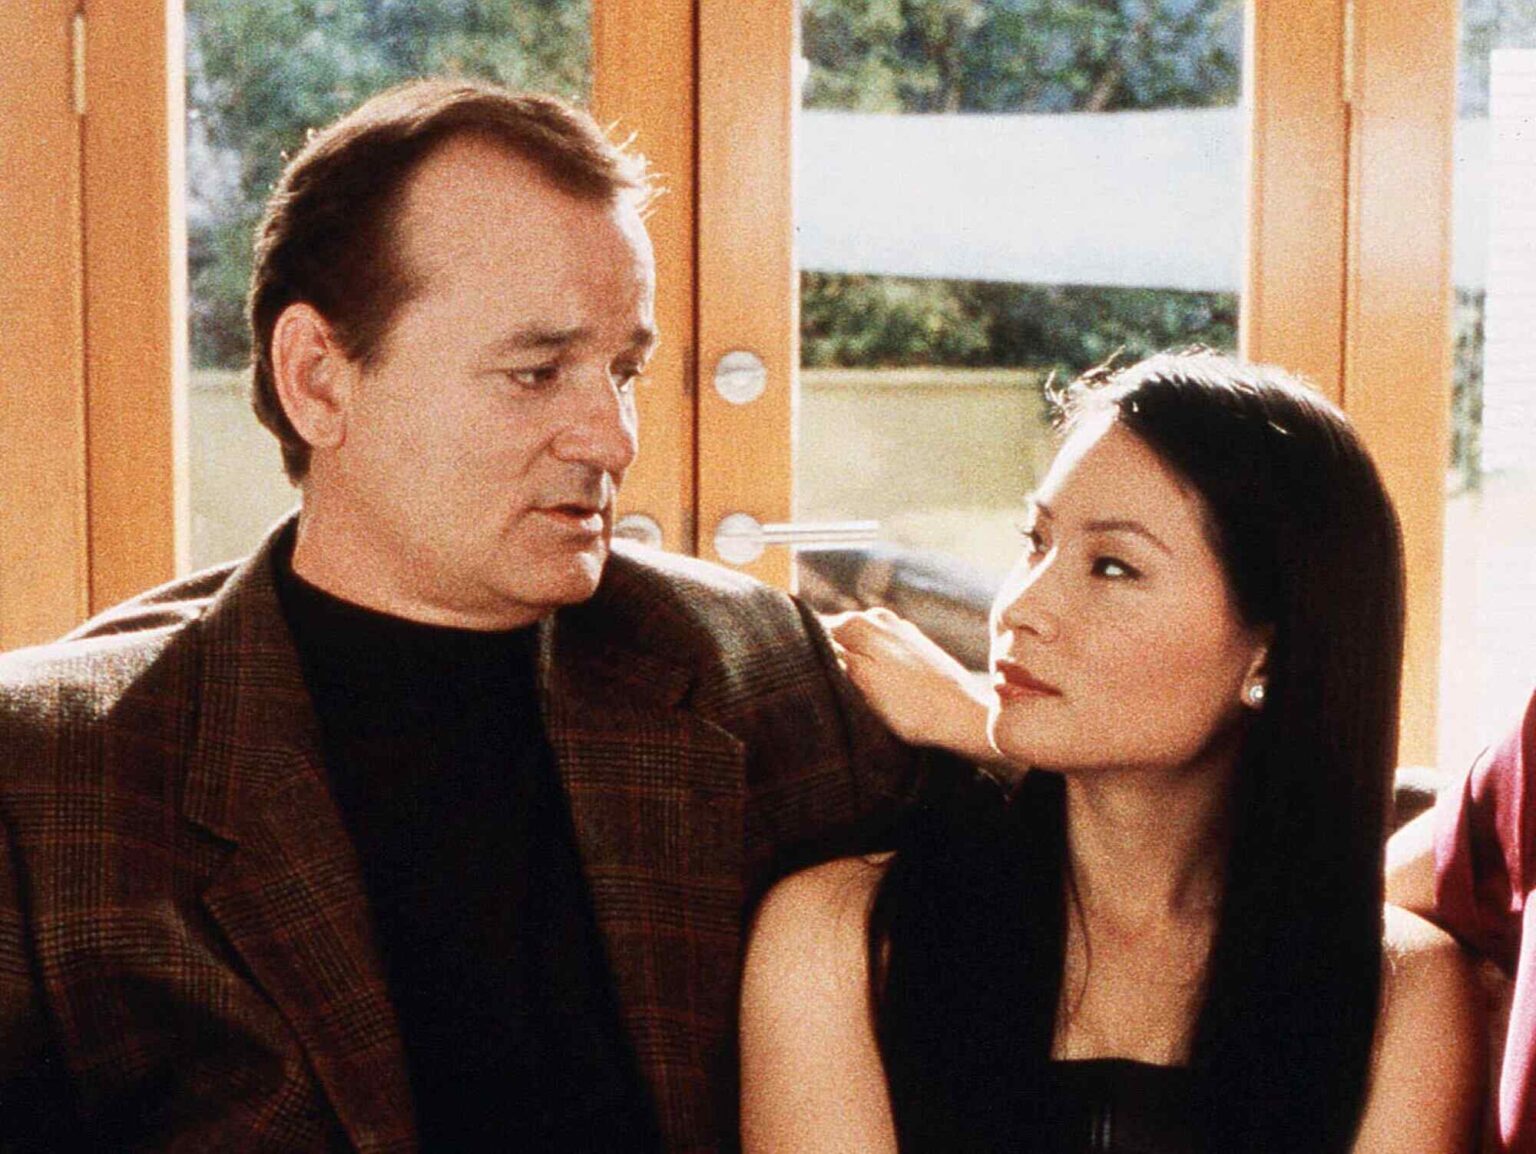 What's it like filming movies with this guy? Twenty years after filming 'Charlie's Angels', Lucy Liu revealed what went down between her and Bill Murray.